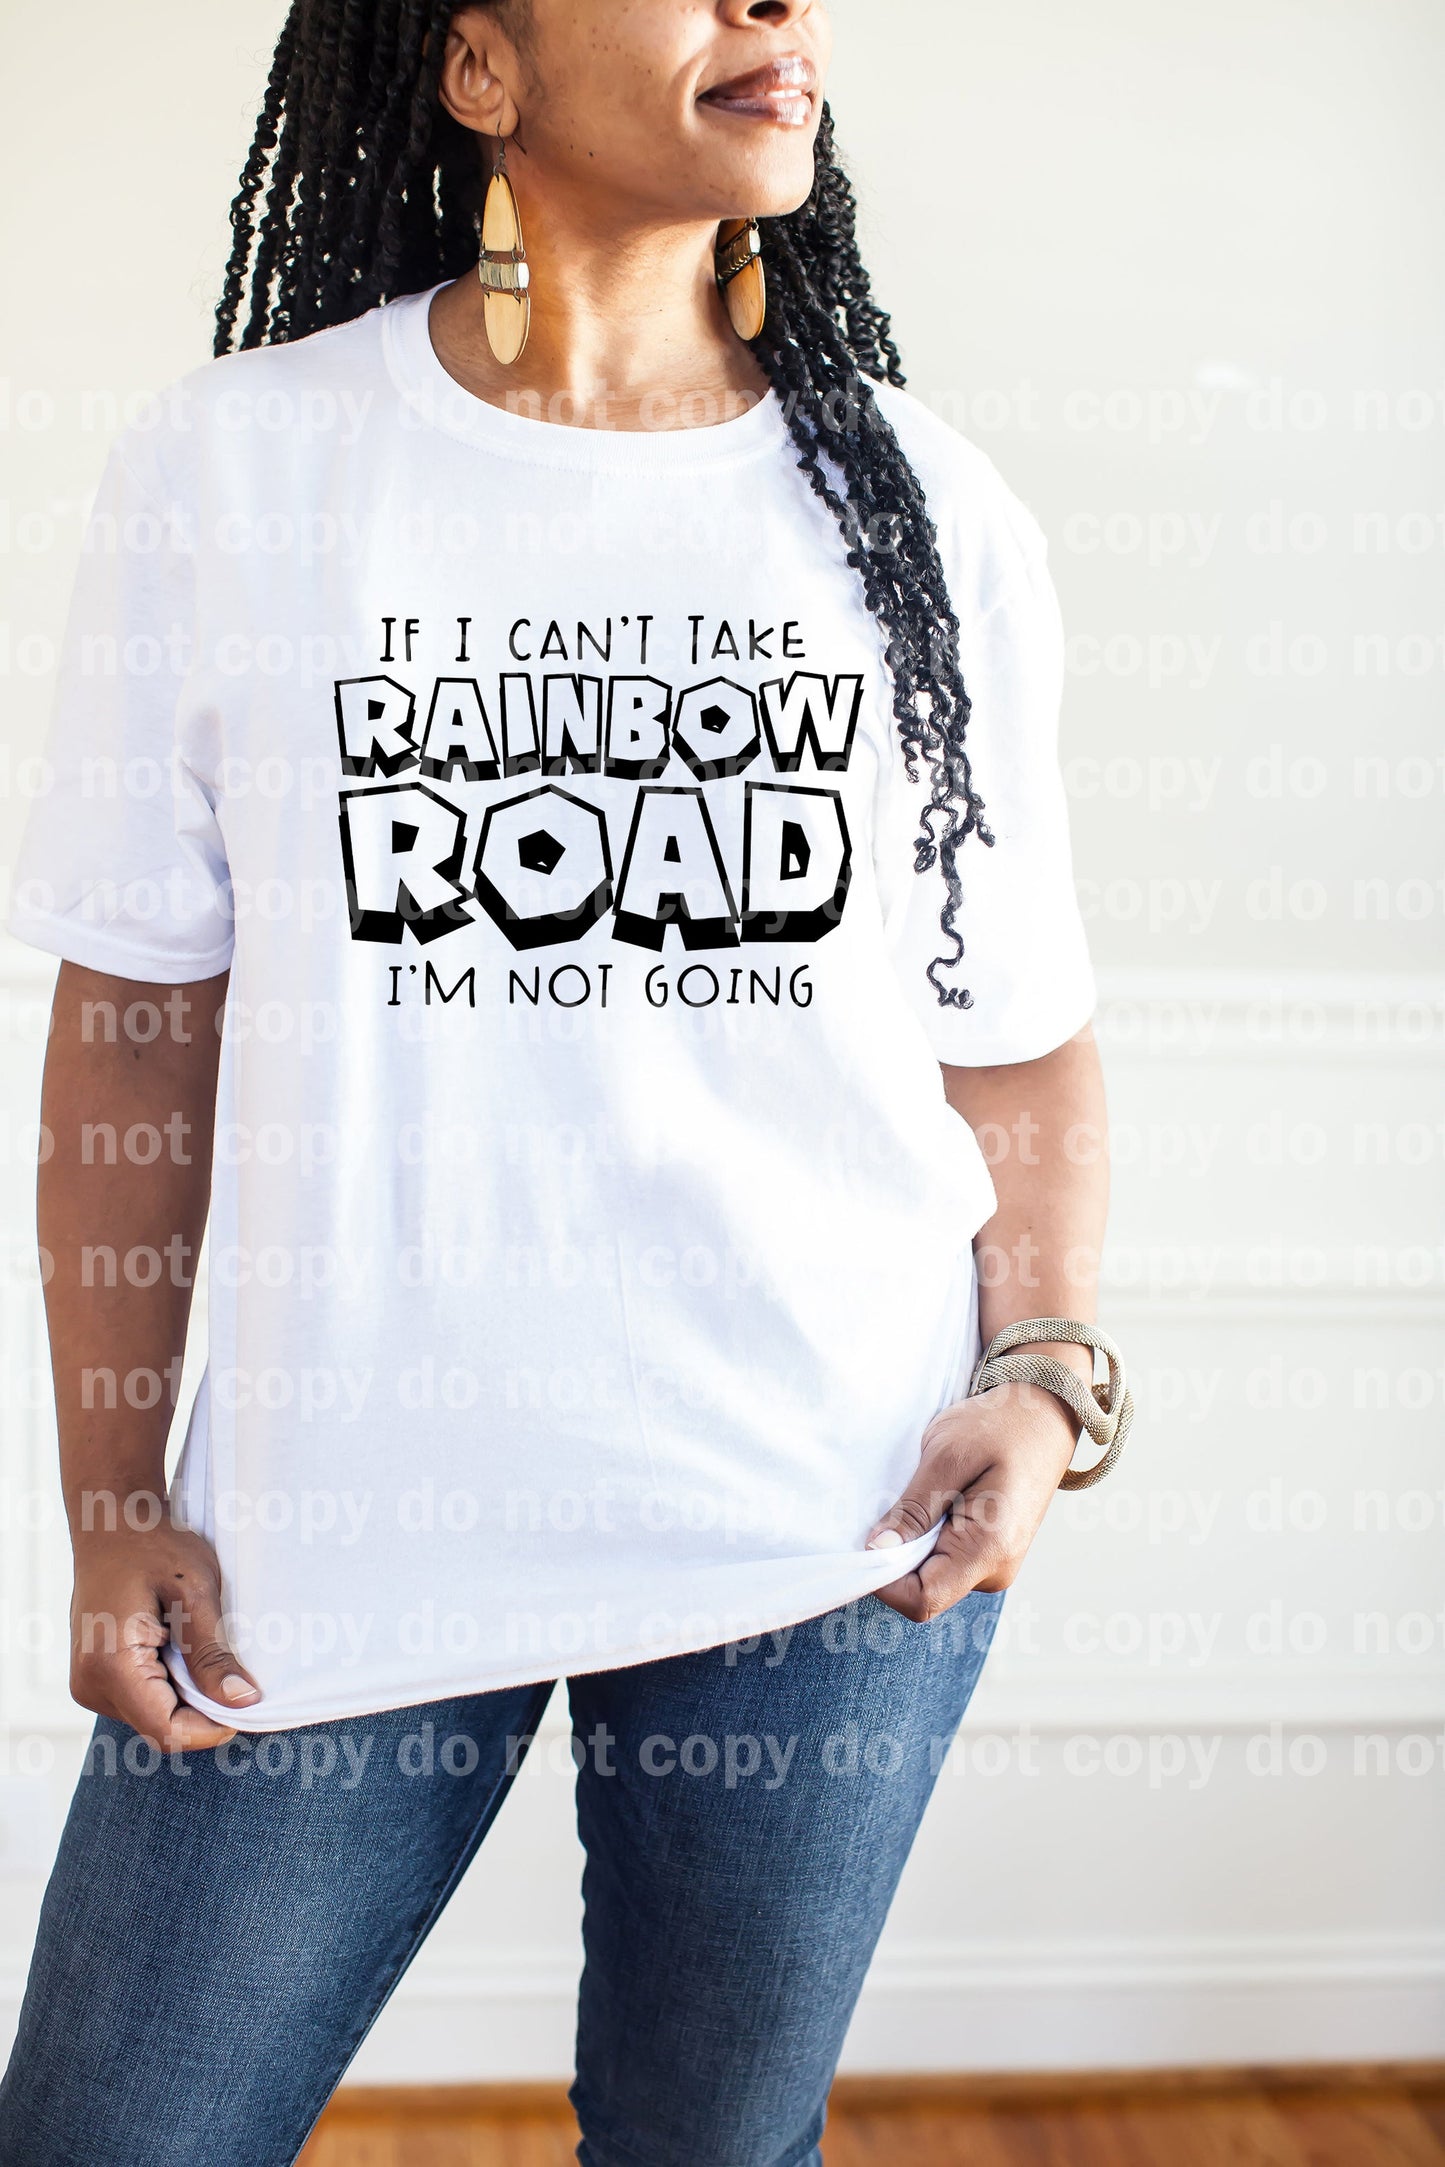 If I Can't Take Rainbow Road I'm Not Going Full Color/One Color Dream Print or Sublimation Print